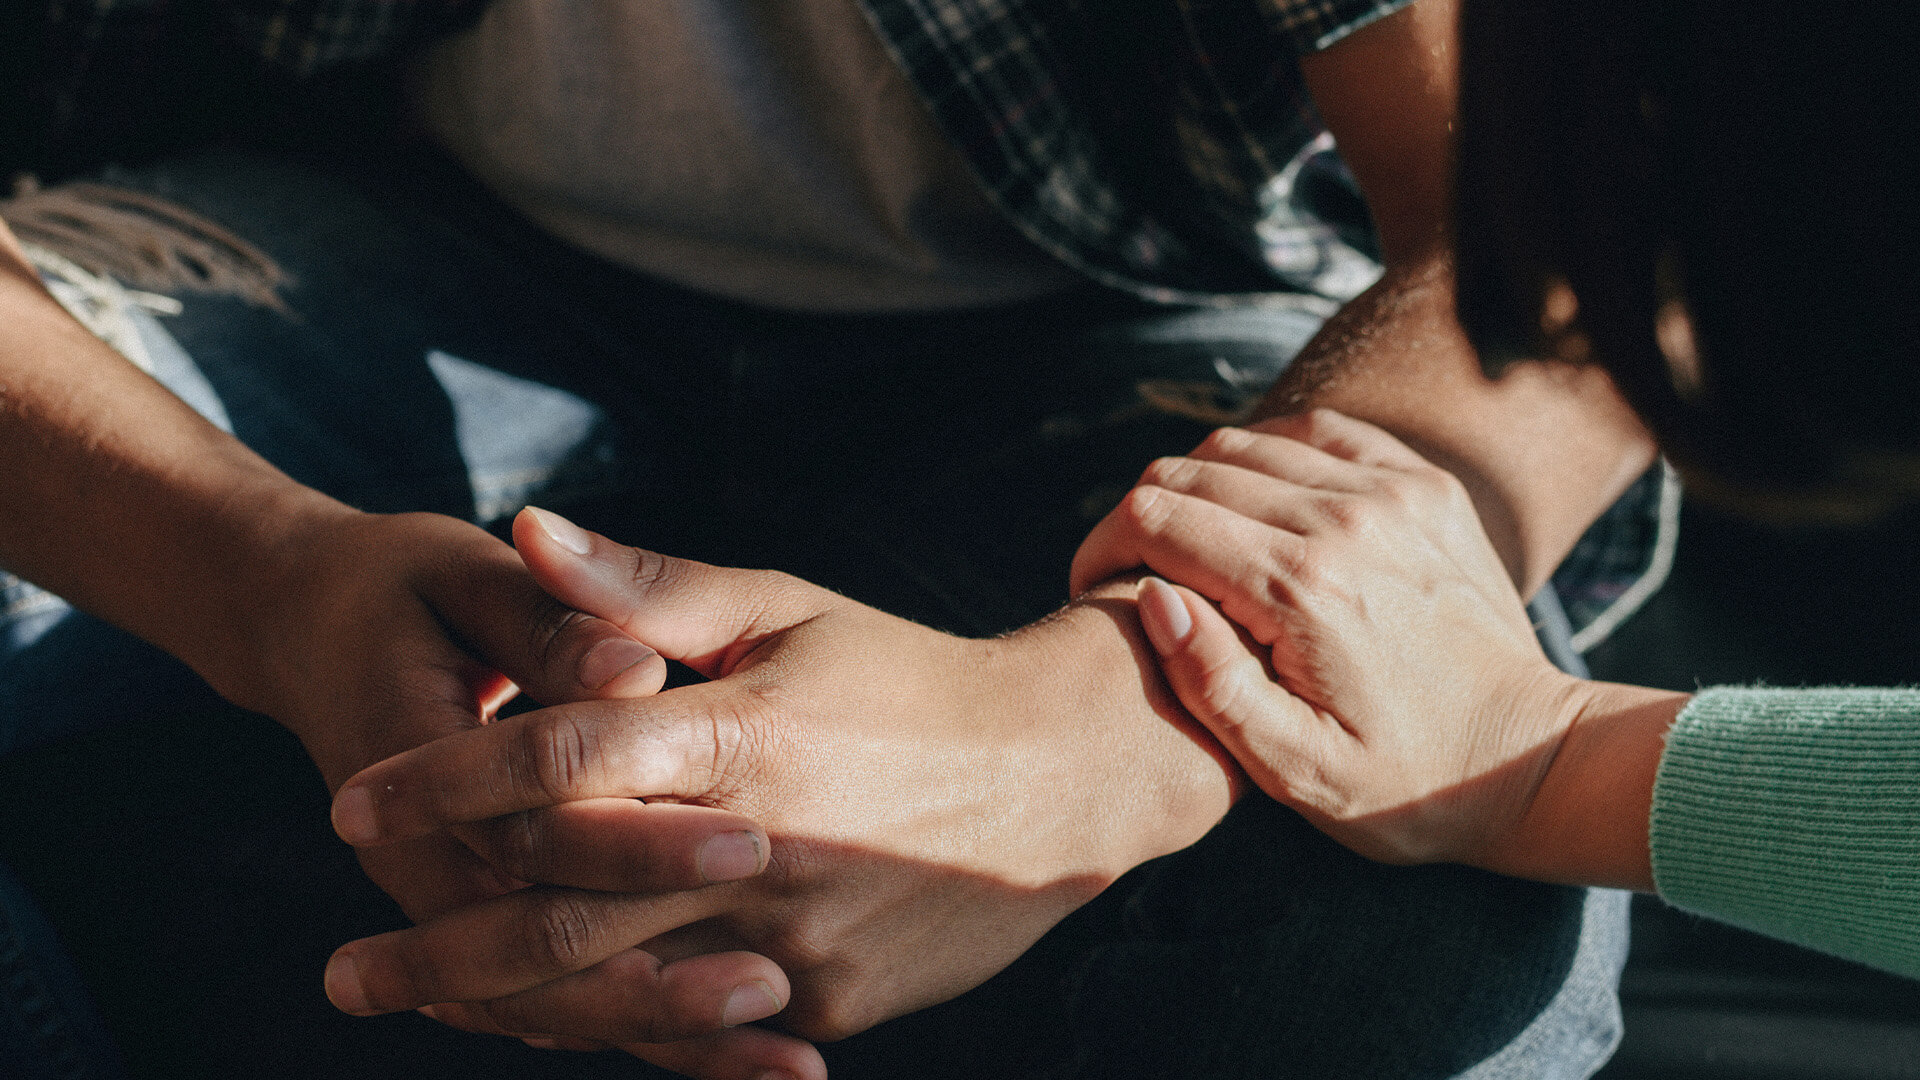 Closeup of a someone fingerlocking their hands, and a mental health first aider comforting them